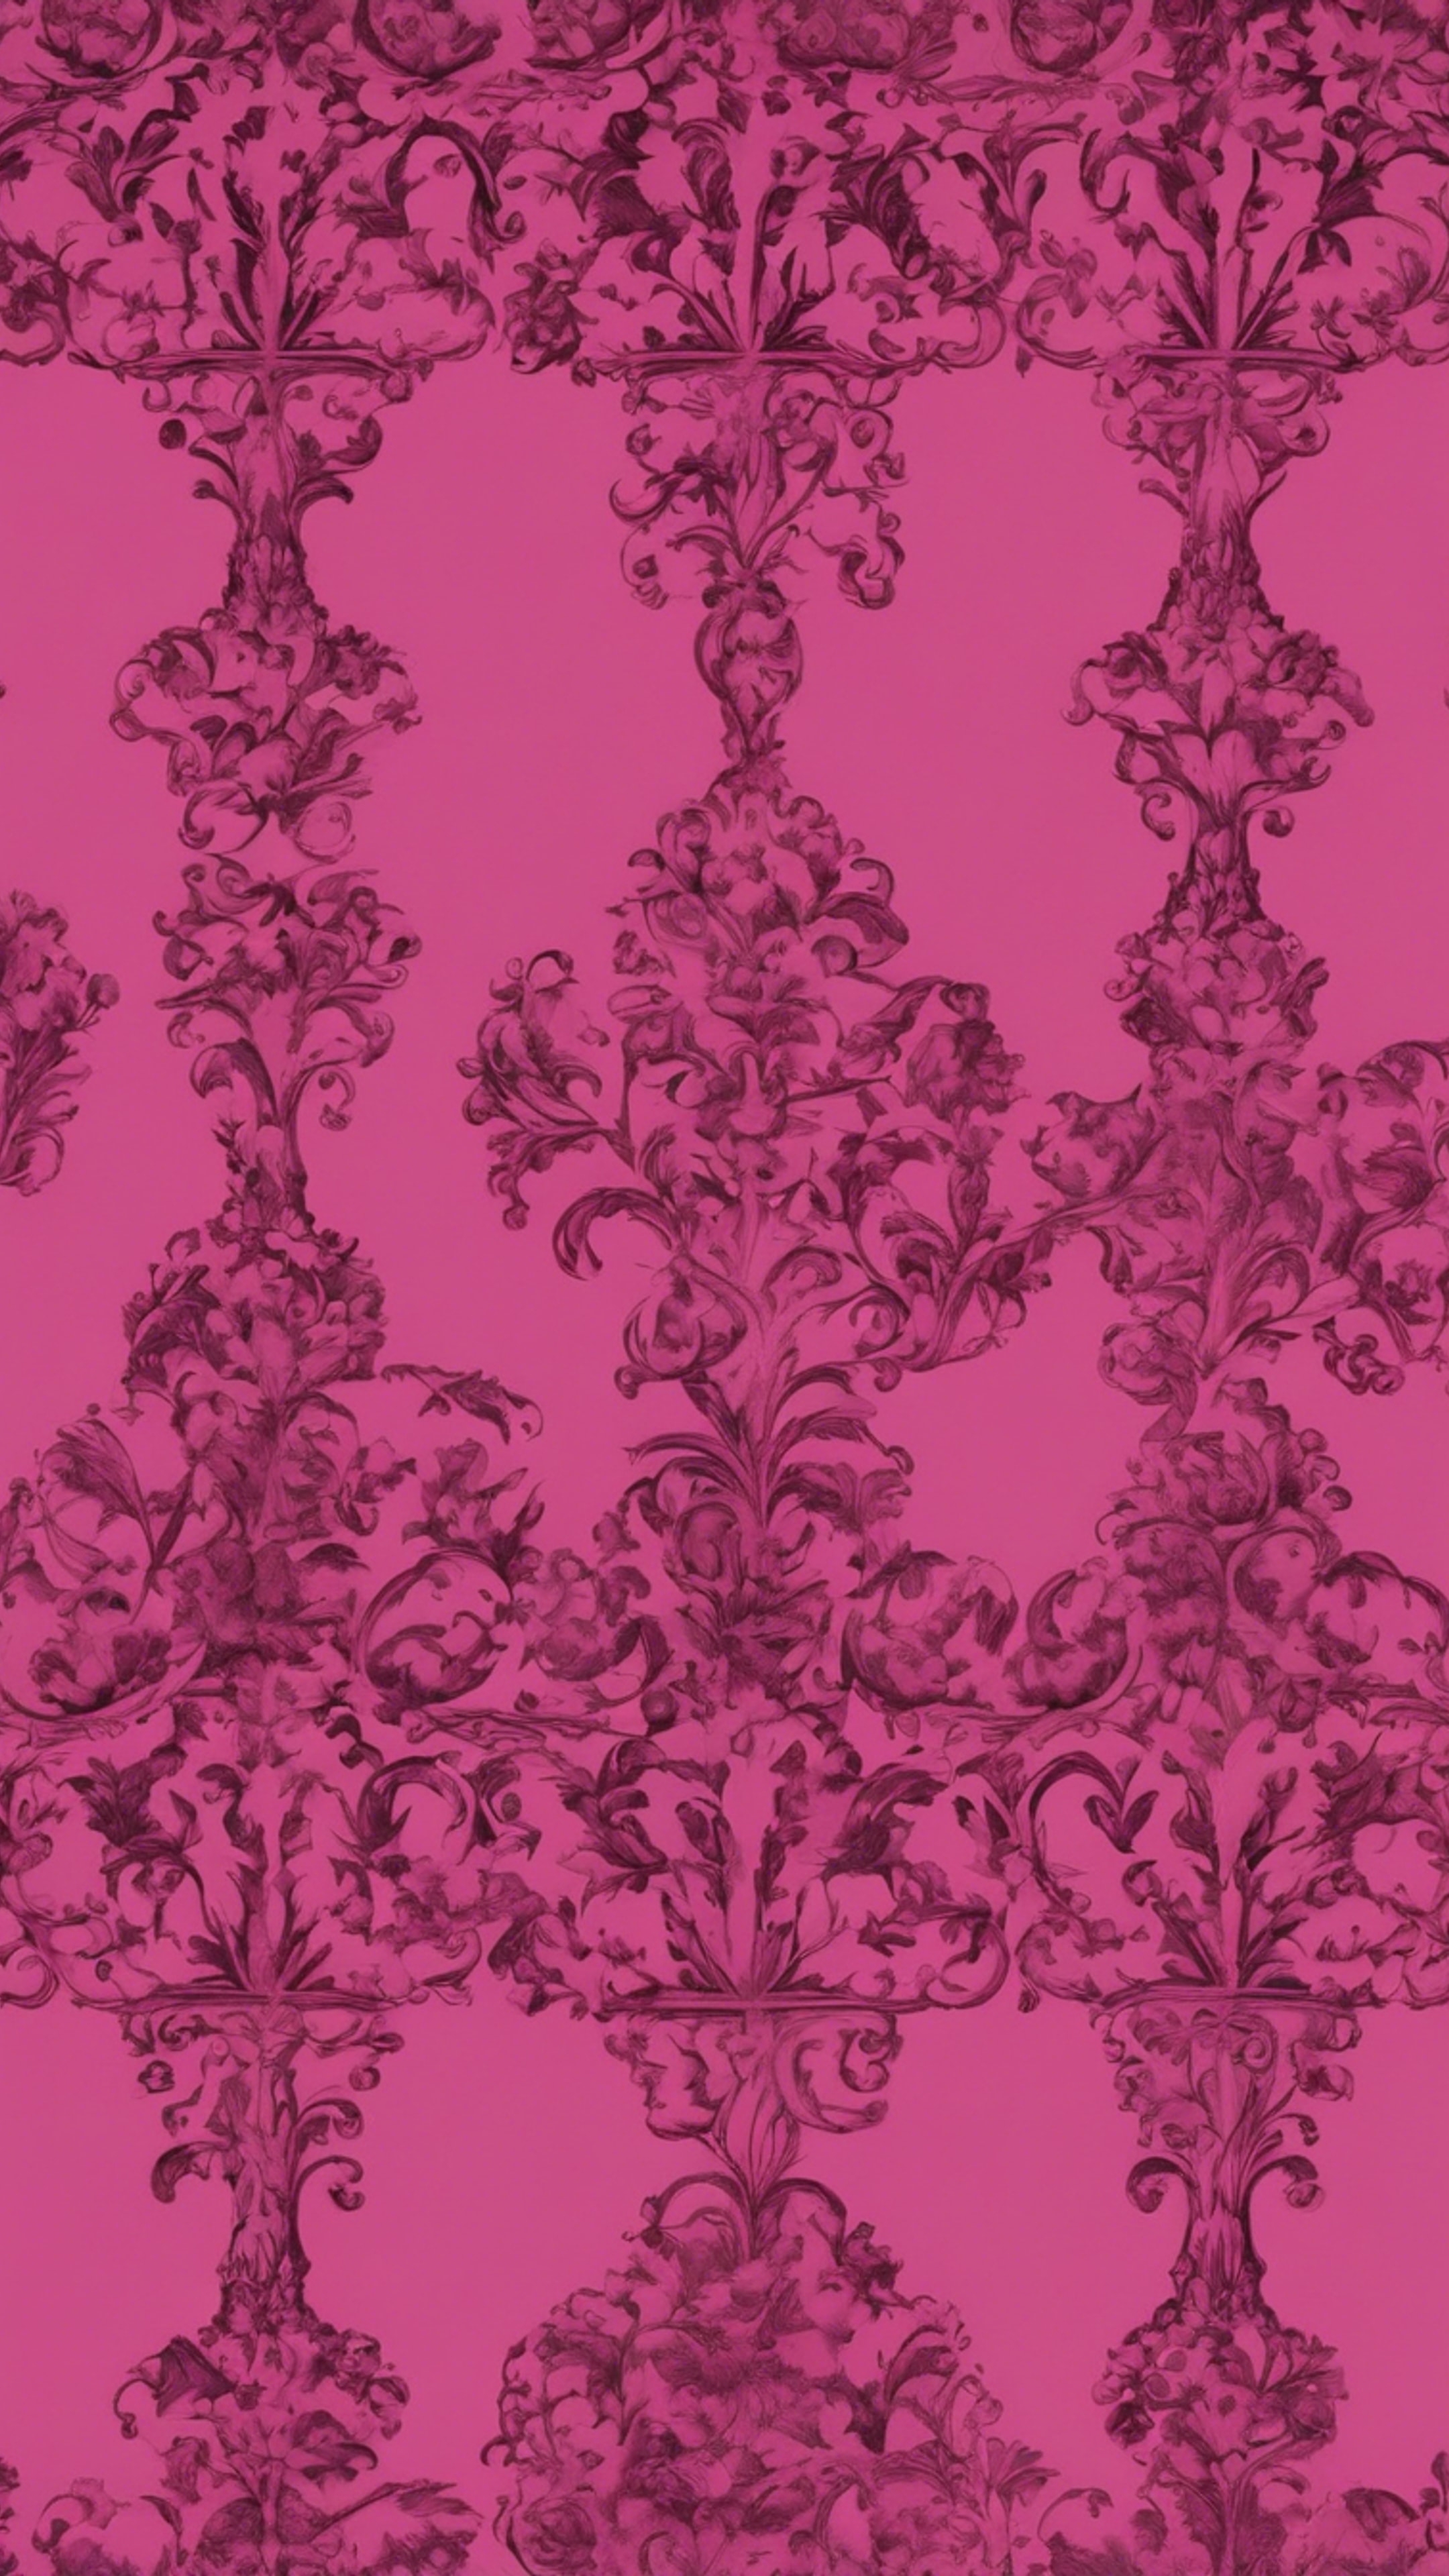 A dark pink Gothic background with baroque patterns.壁紙[5770fecf2152499e8904]